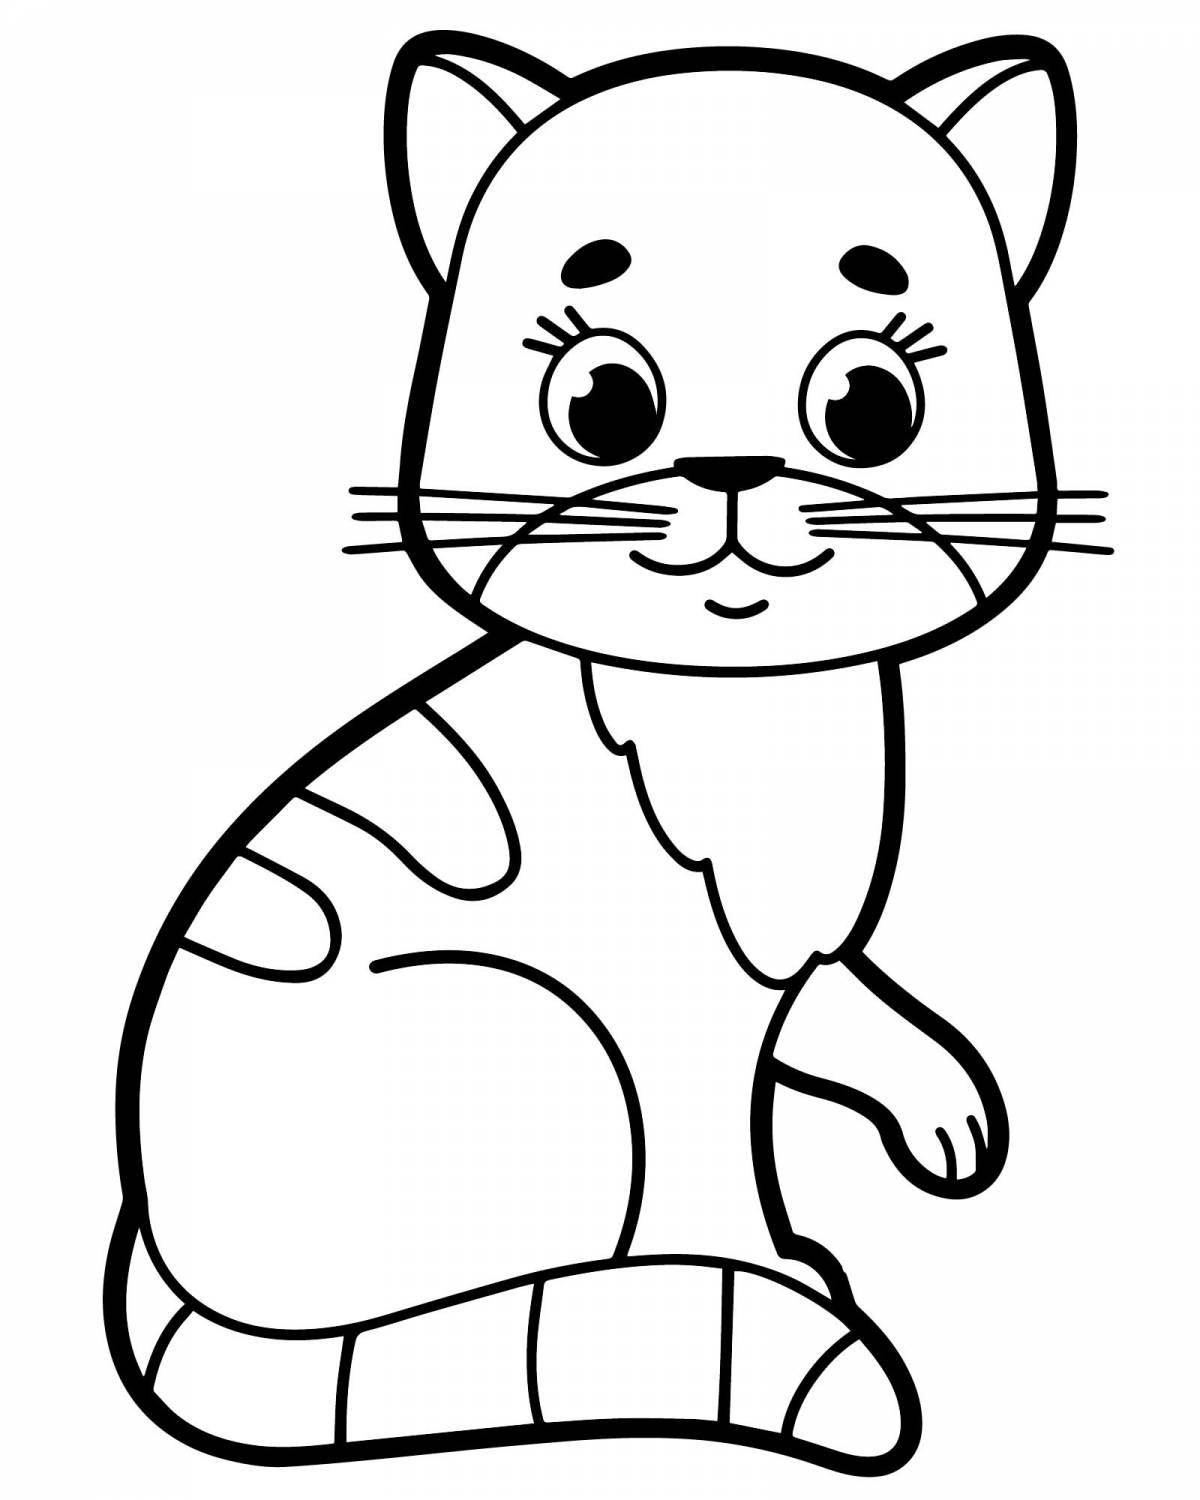 Coloring book funny kitten for children 2-3 years old